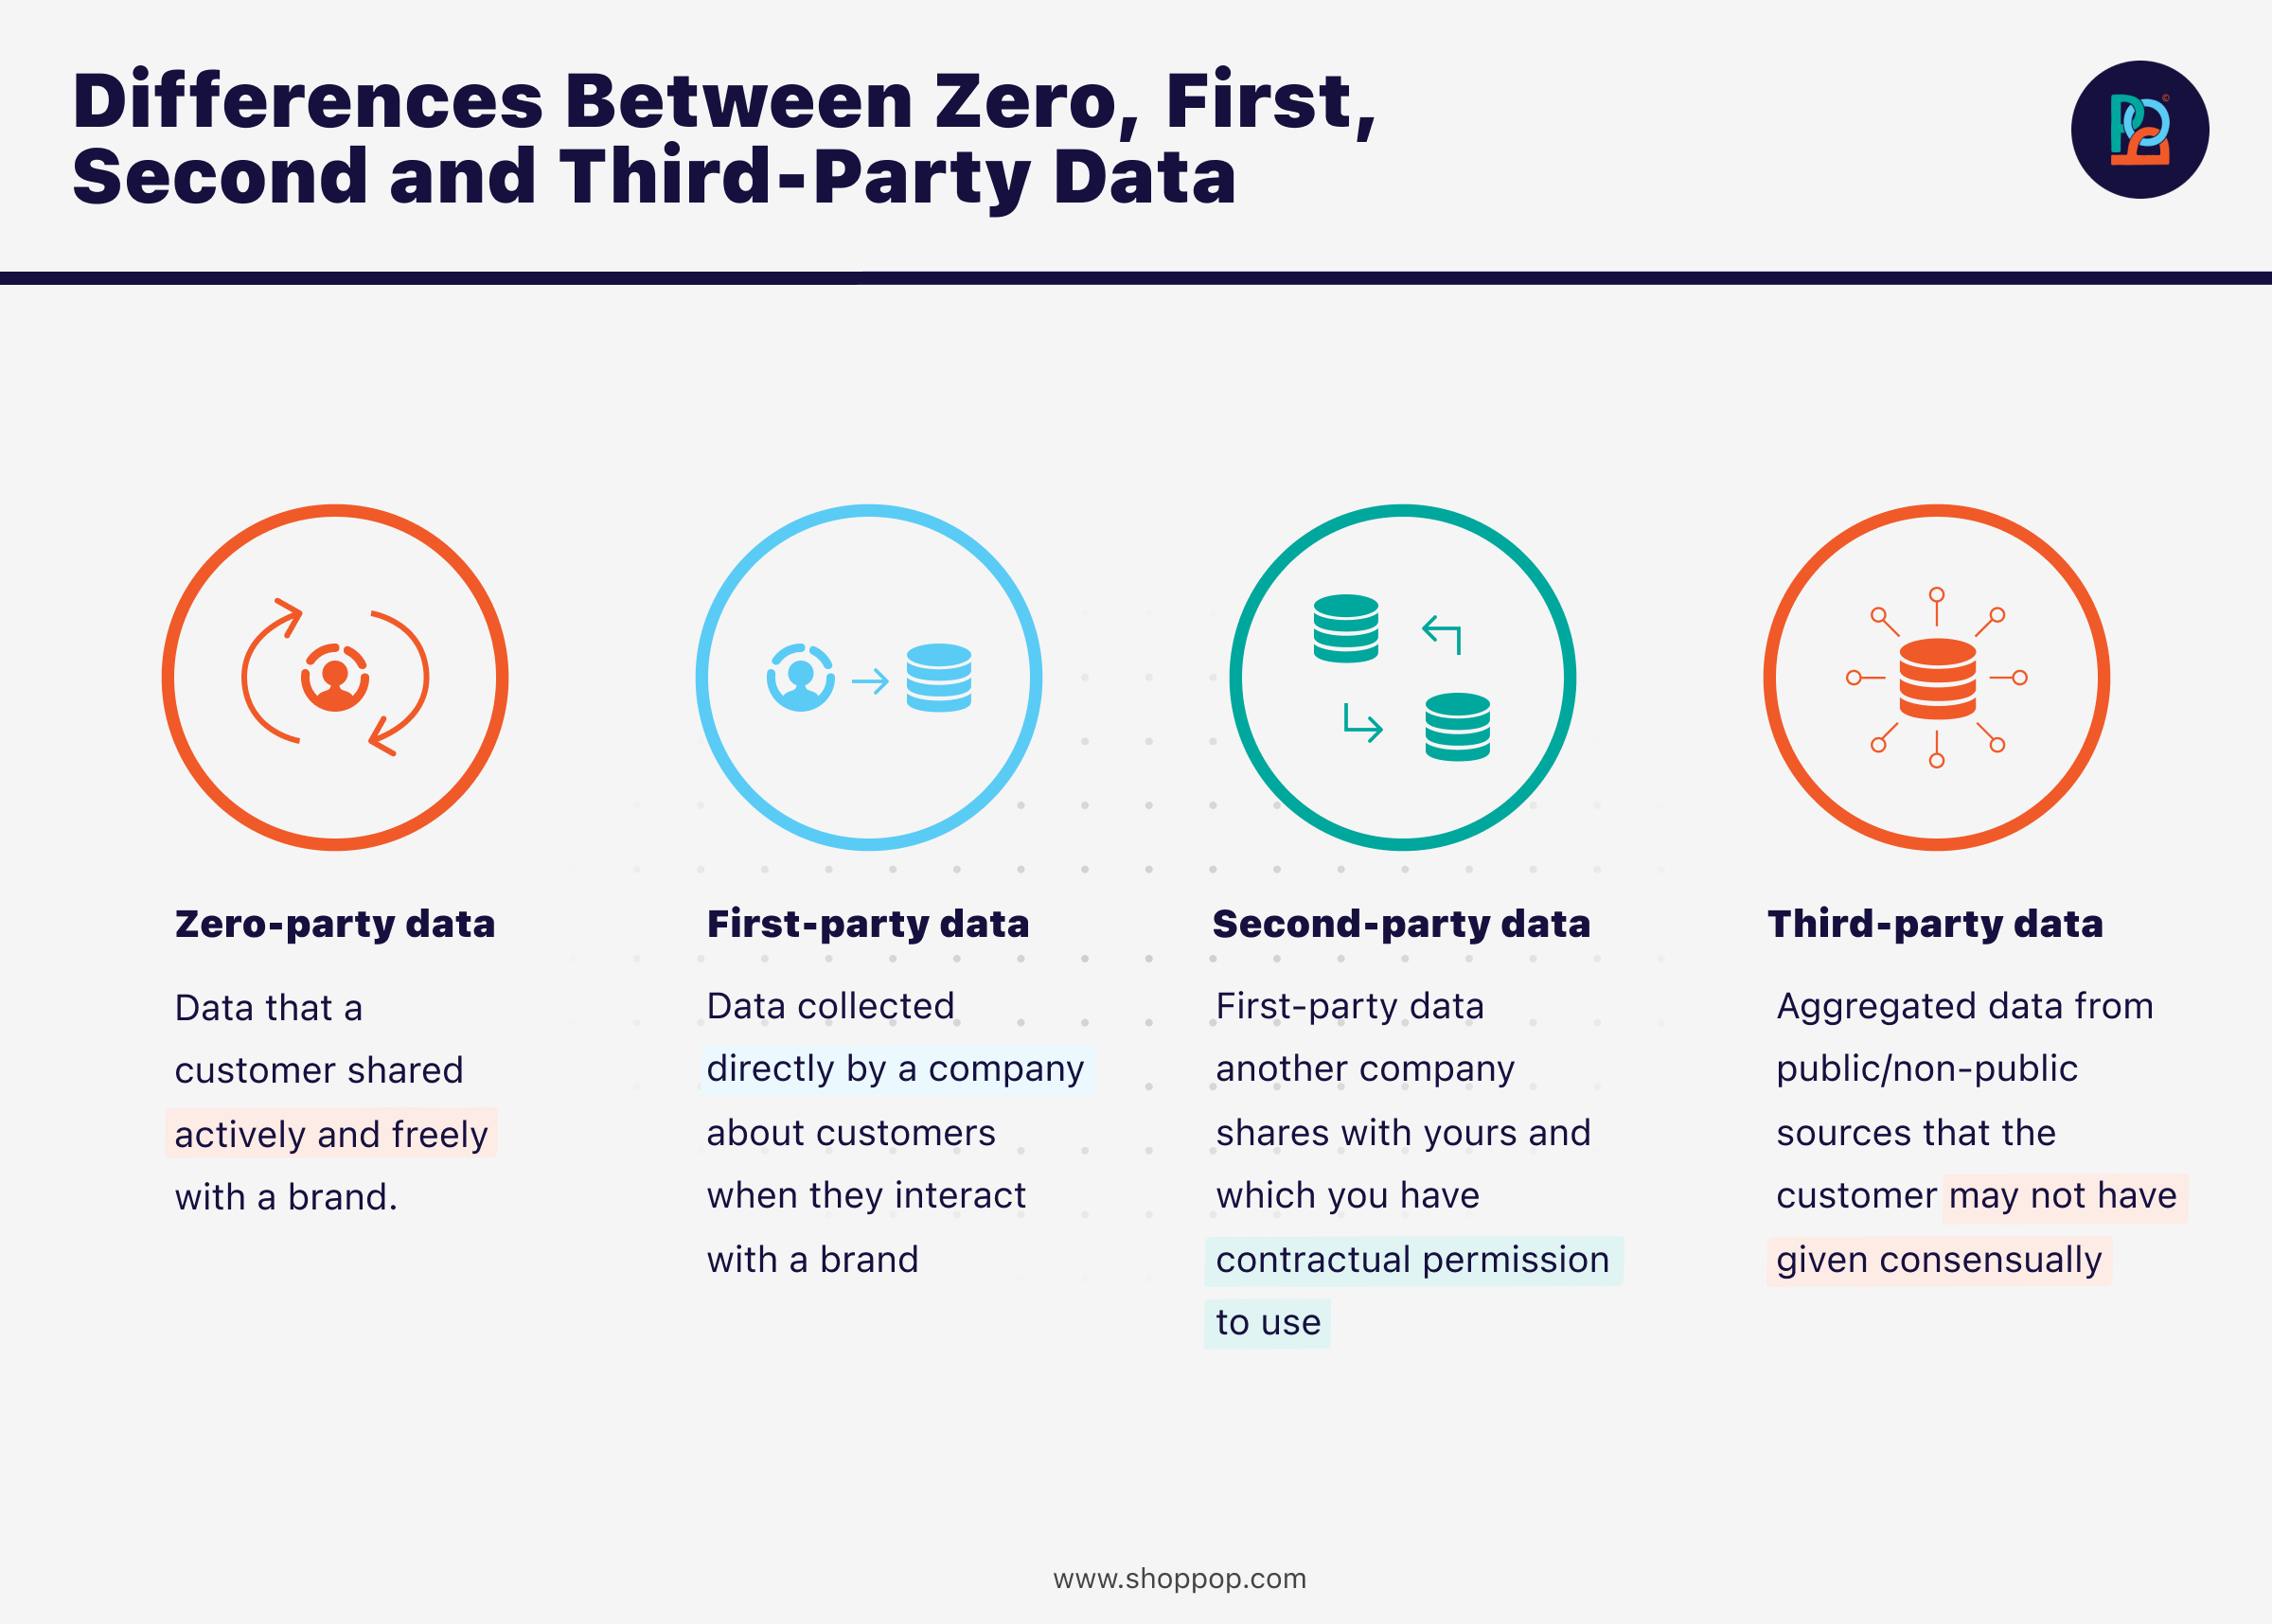 Differences-Between-Zero-First-Second-Third-Party-Data